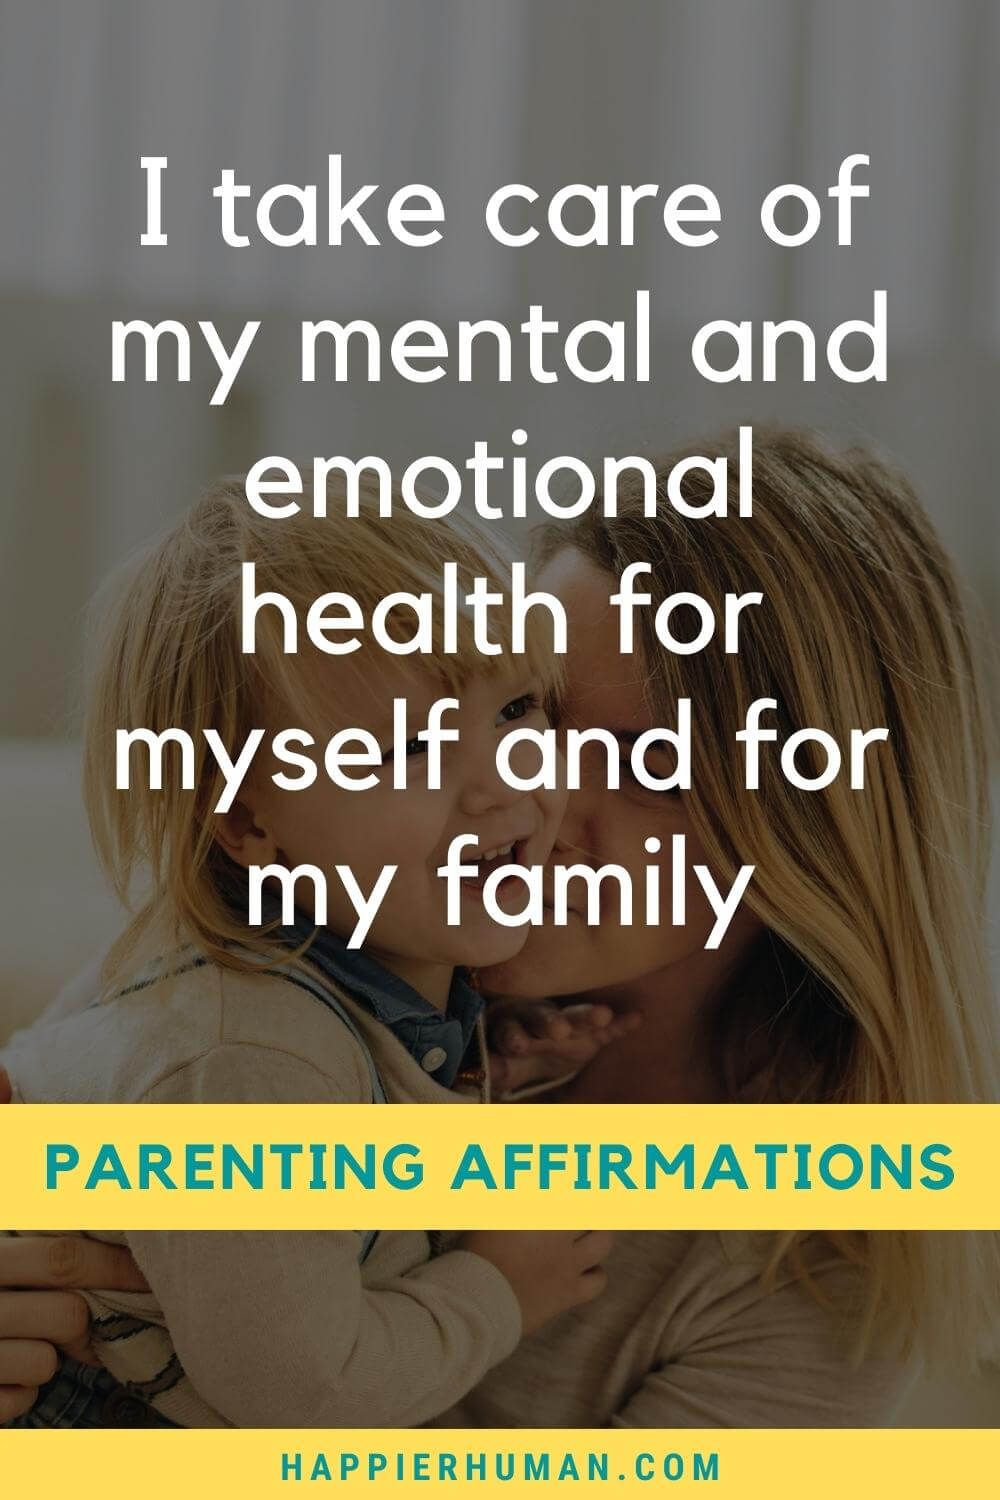 Parenting Affirmations - I take care of my mental and emotional health for myself and for my family | affirmations for strict parents | parenting affirmations youtube | gentle parenting affirmations